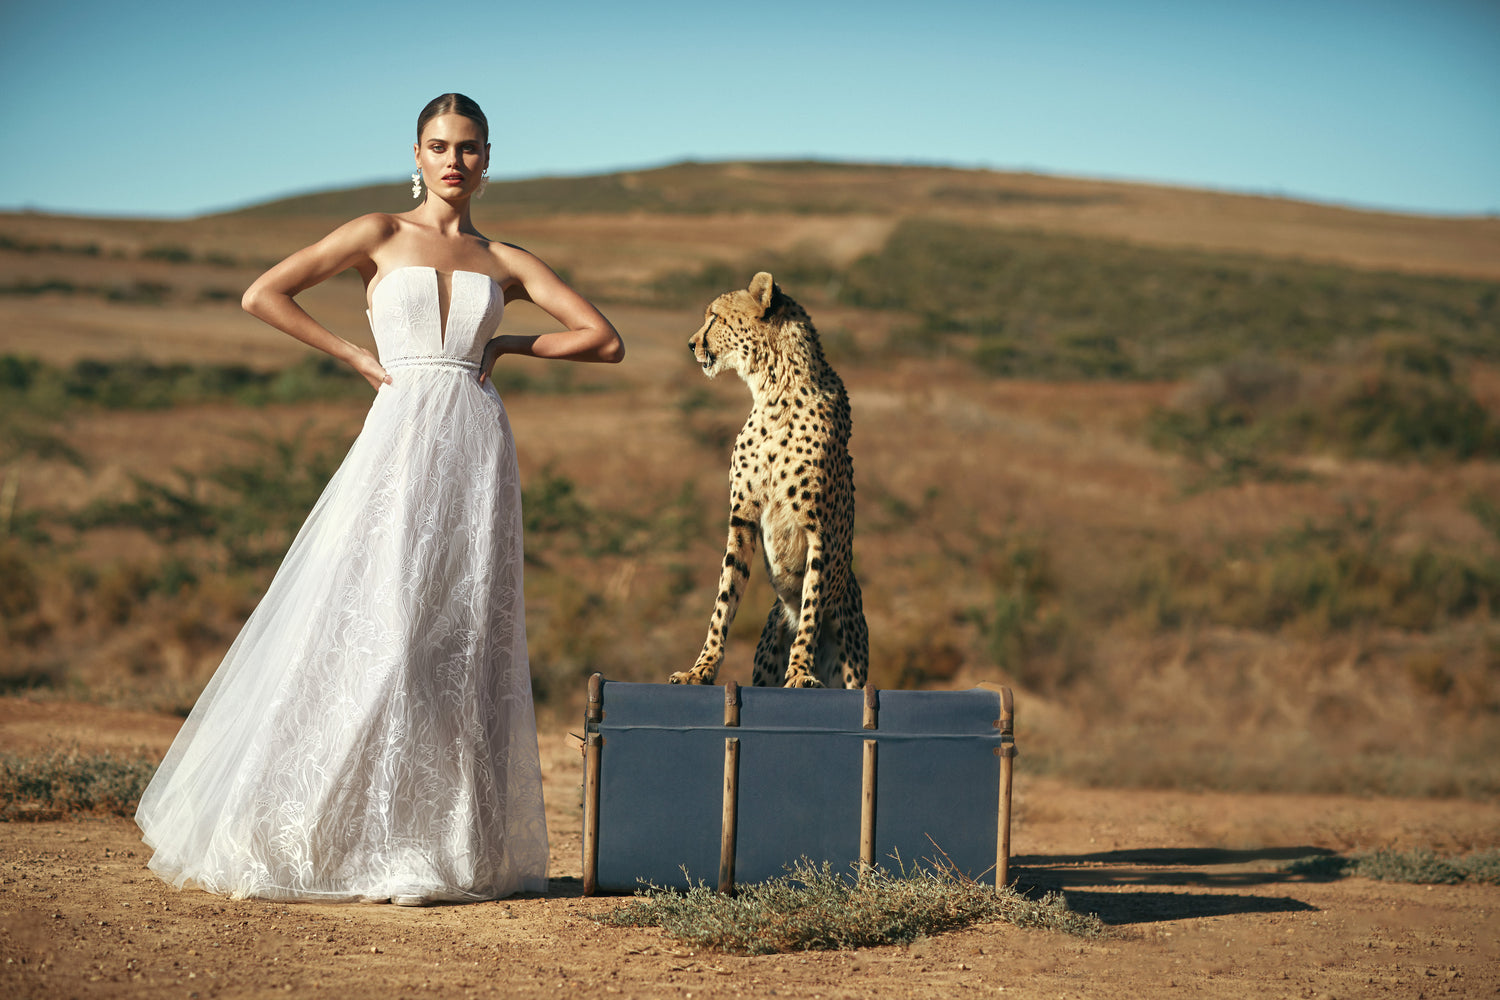 A woman stands with her hands on her hips is wearing a long modern white sleeveless floral wedding dress. The woman is standing next to a leopard that is standing on top of a blue trunk.